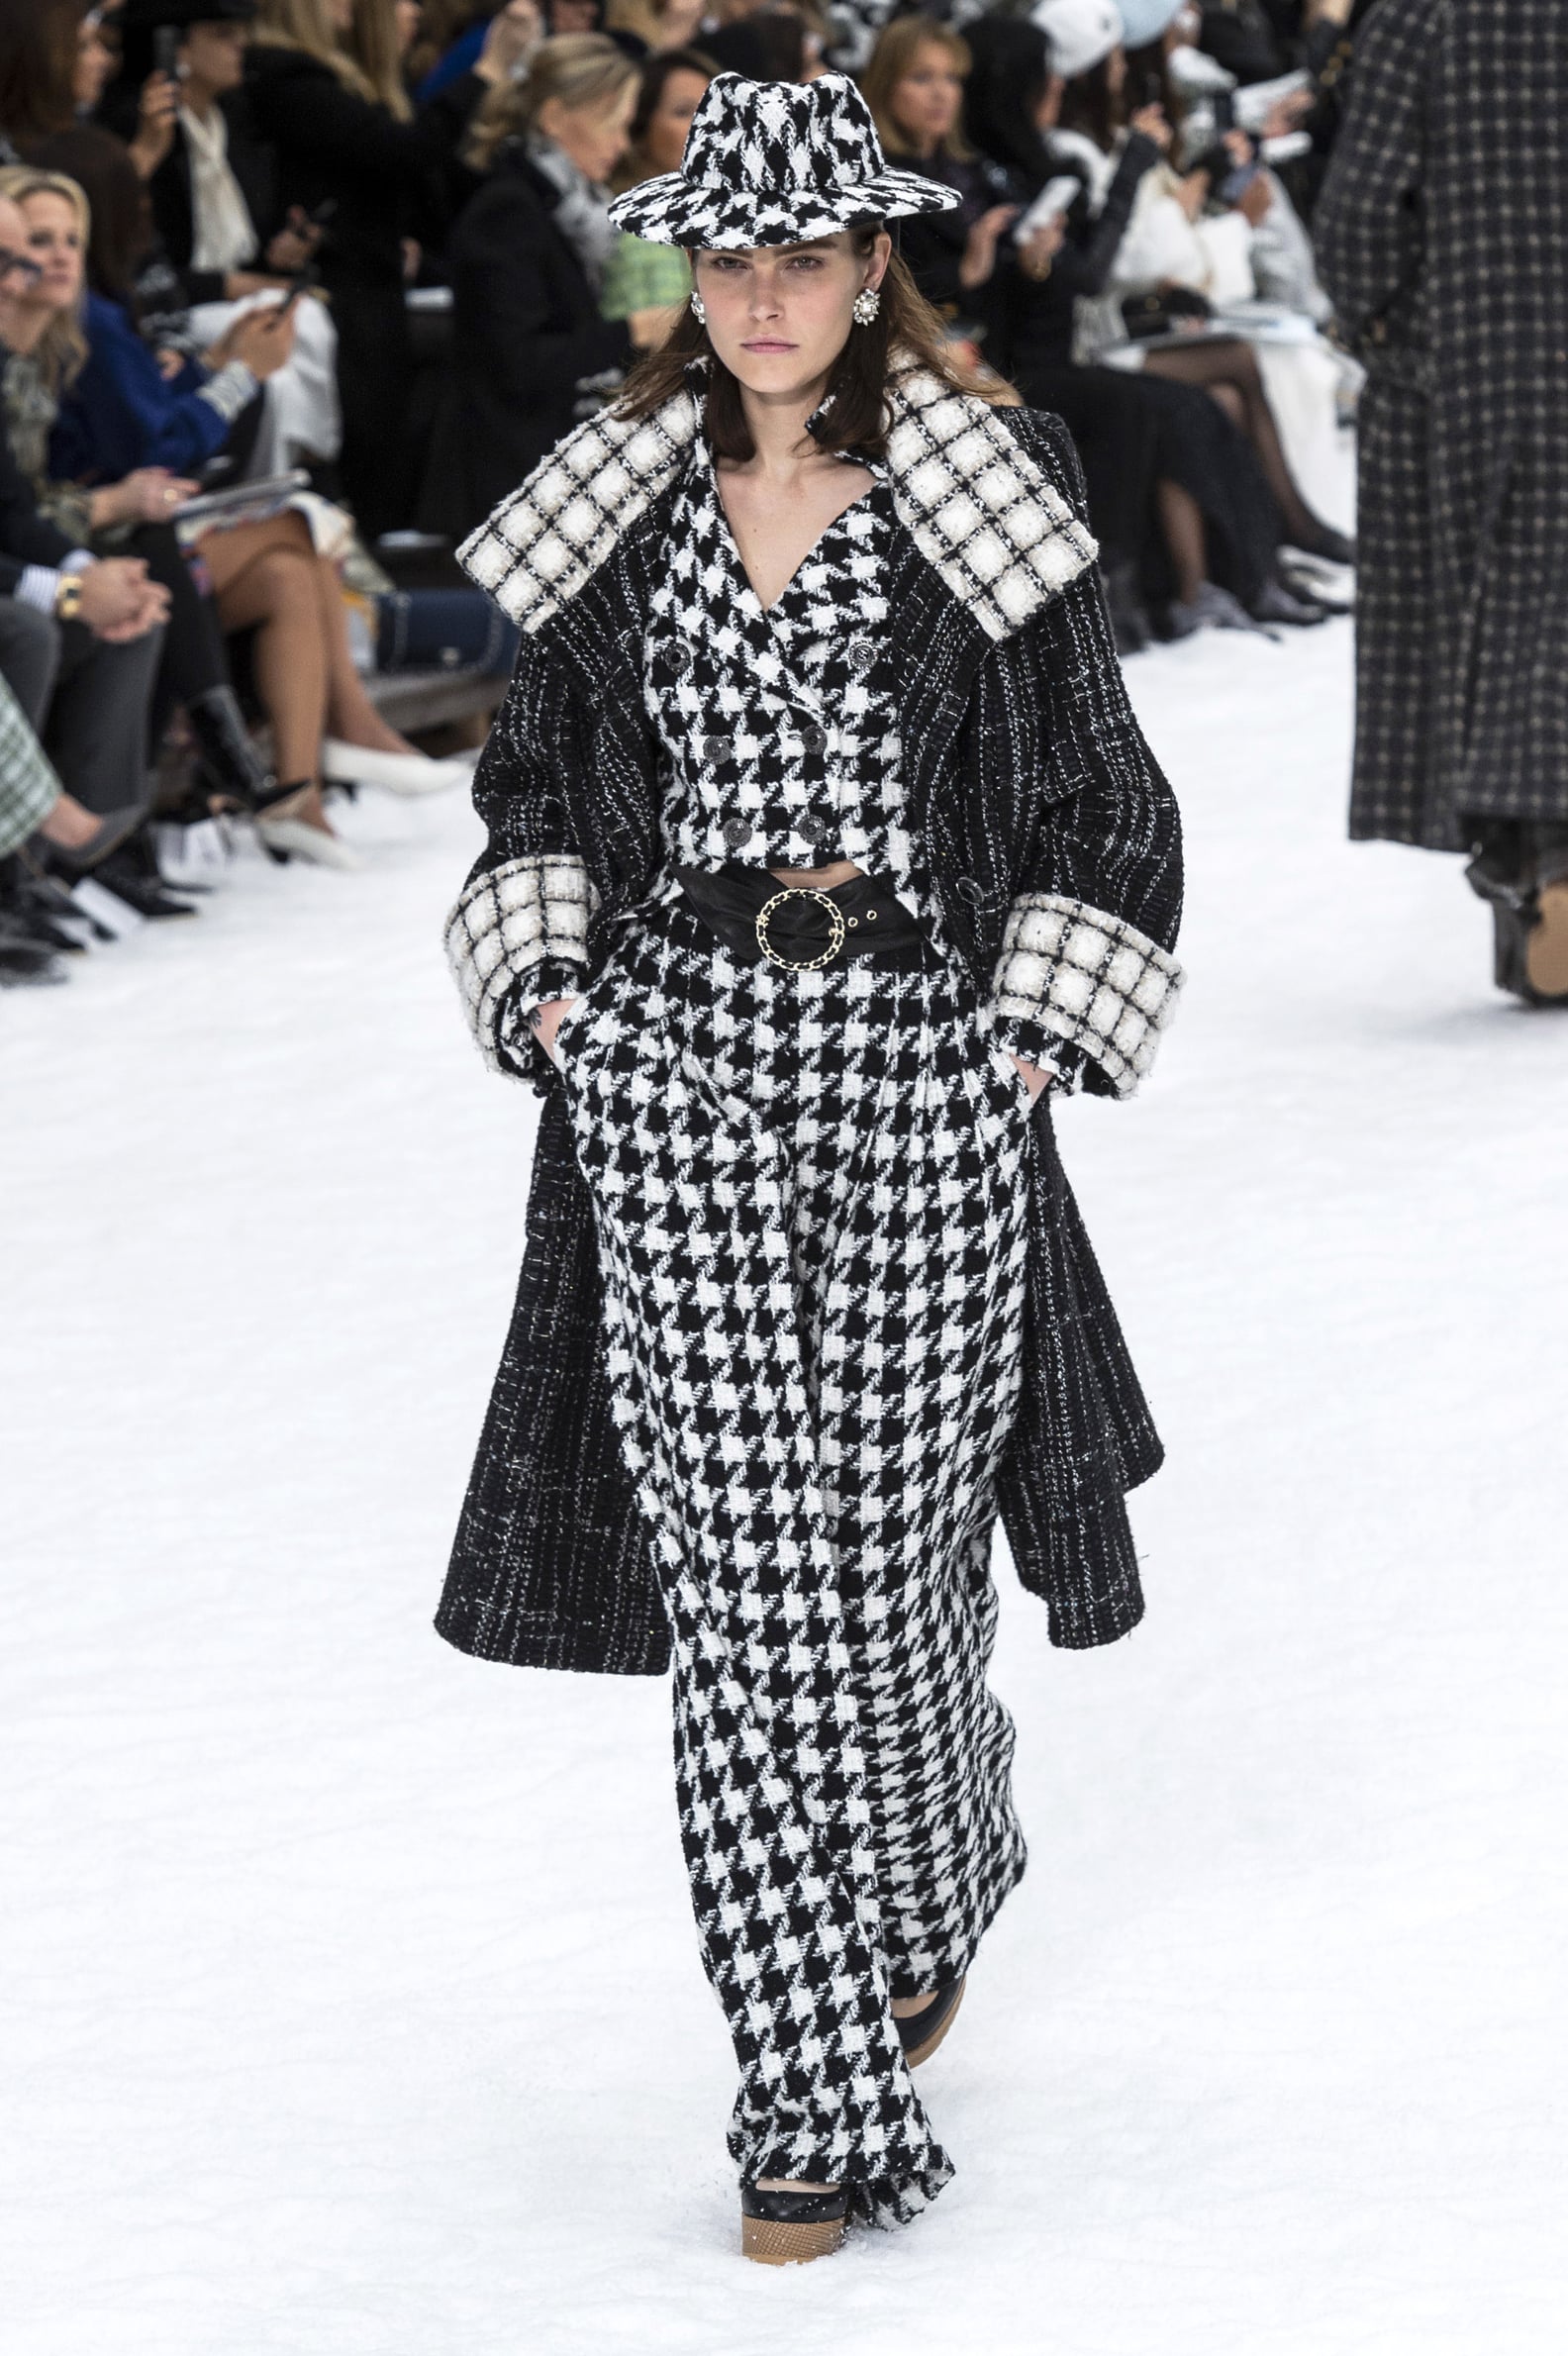 Chanel Fall 2019 Runway Pictures | POPSUGAR Fashion